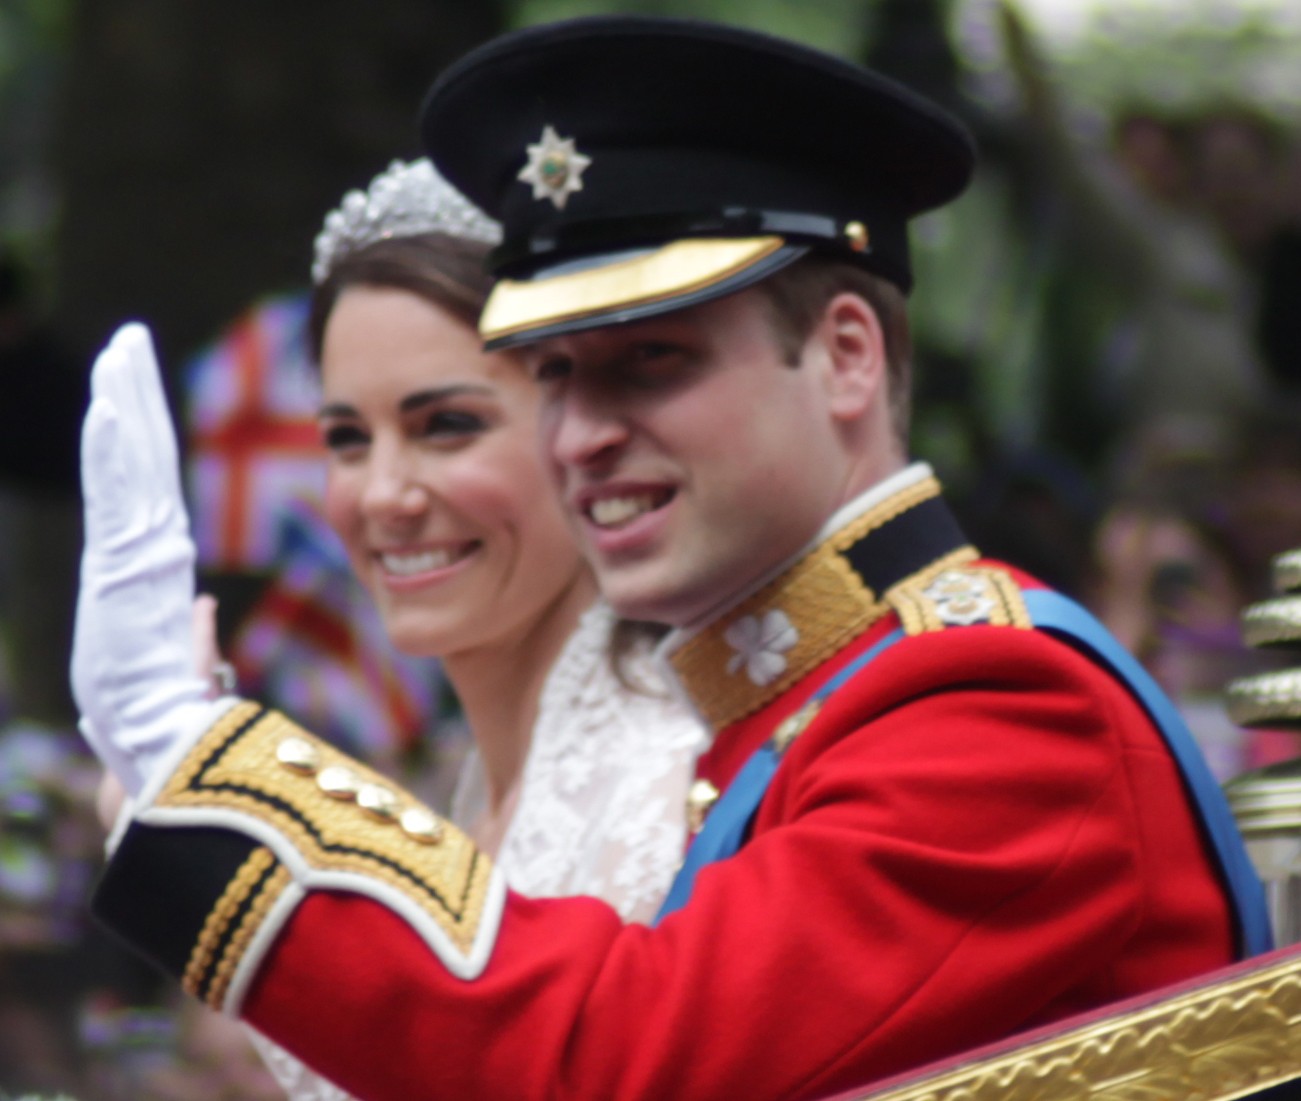 Kate Middleton and Prince William | Credit: Robbie Dale for Wikimedia Commons